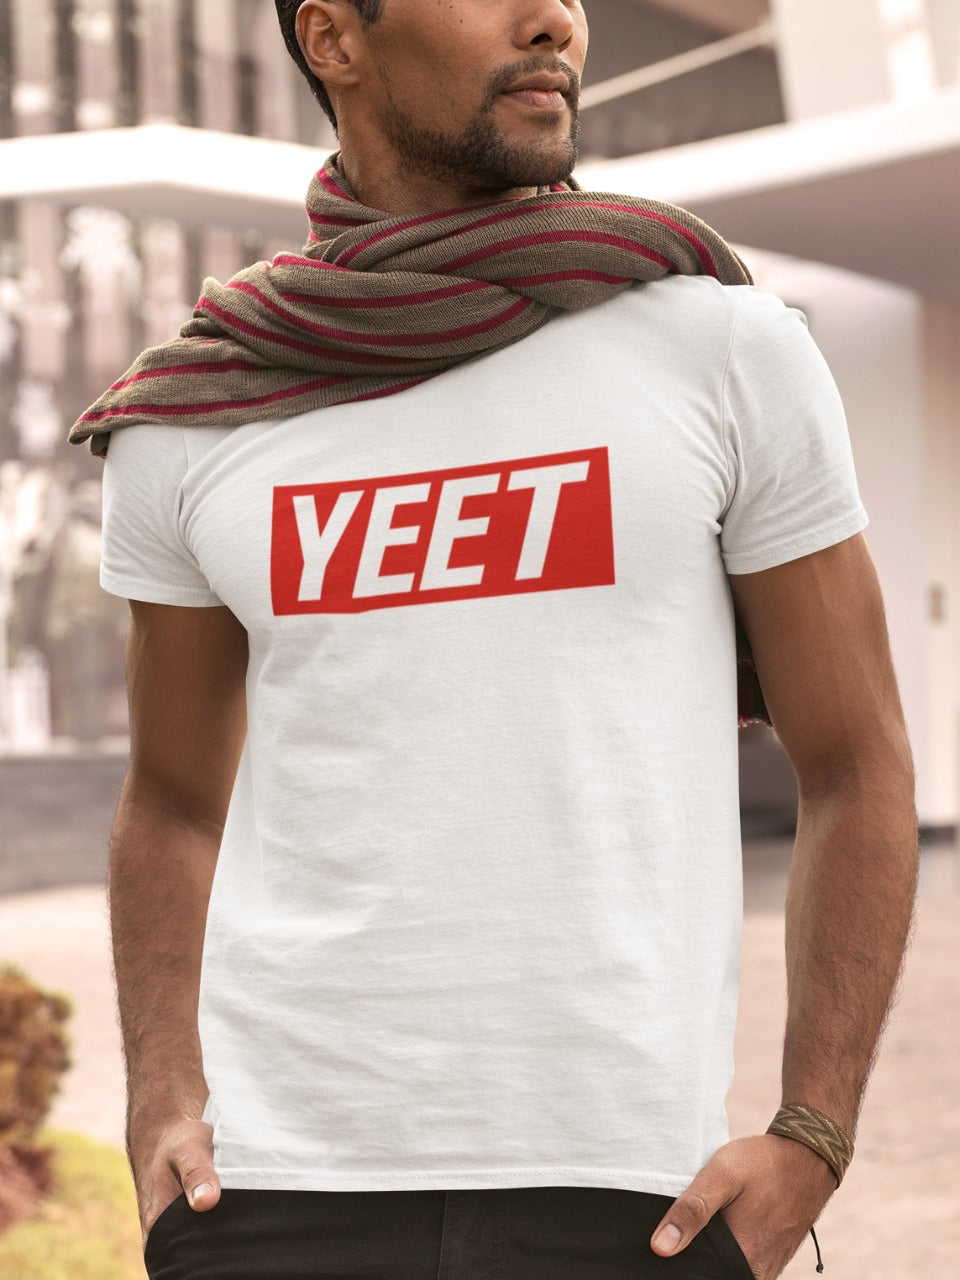 Man with light beard wearing a scarf and white tshirt with yeet written on it in red colour, cool memes